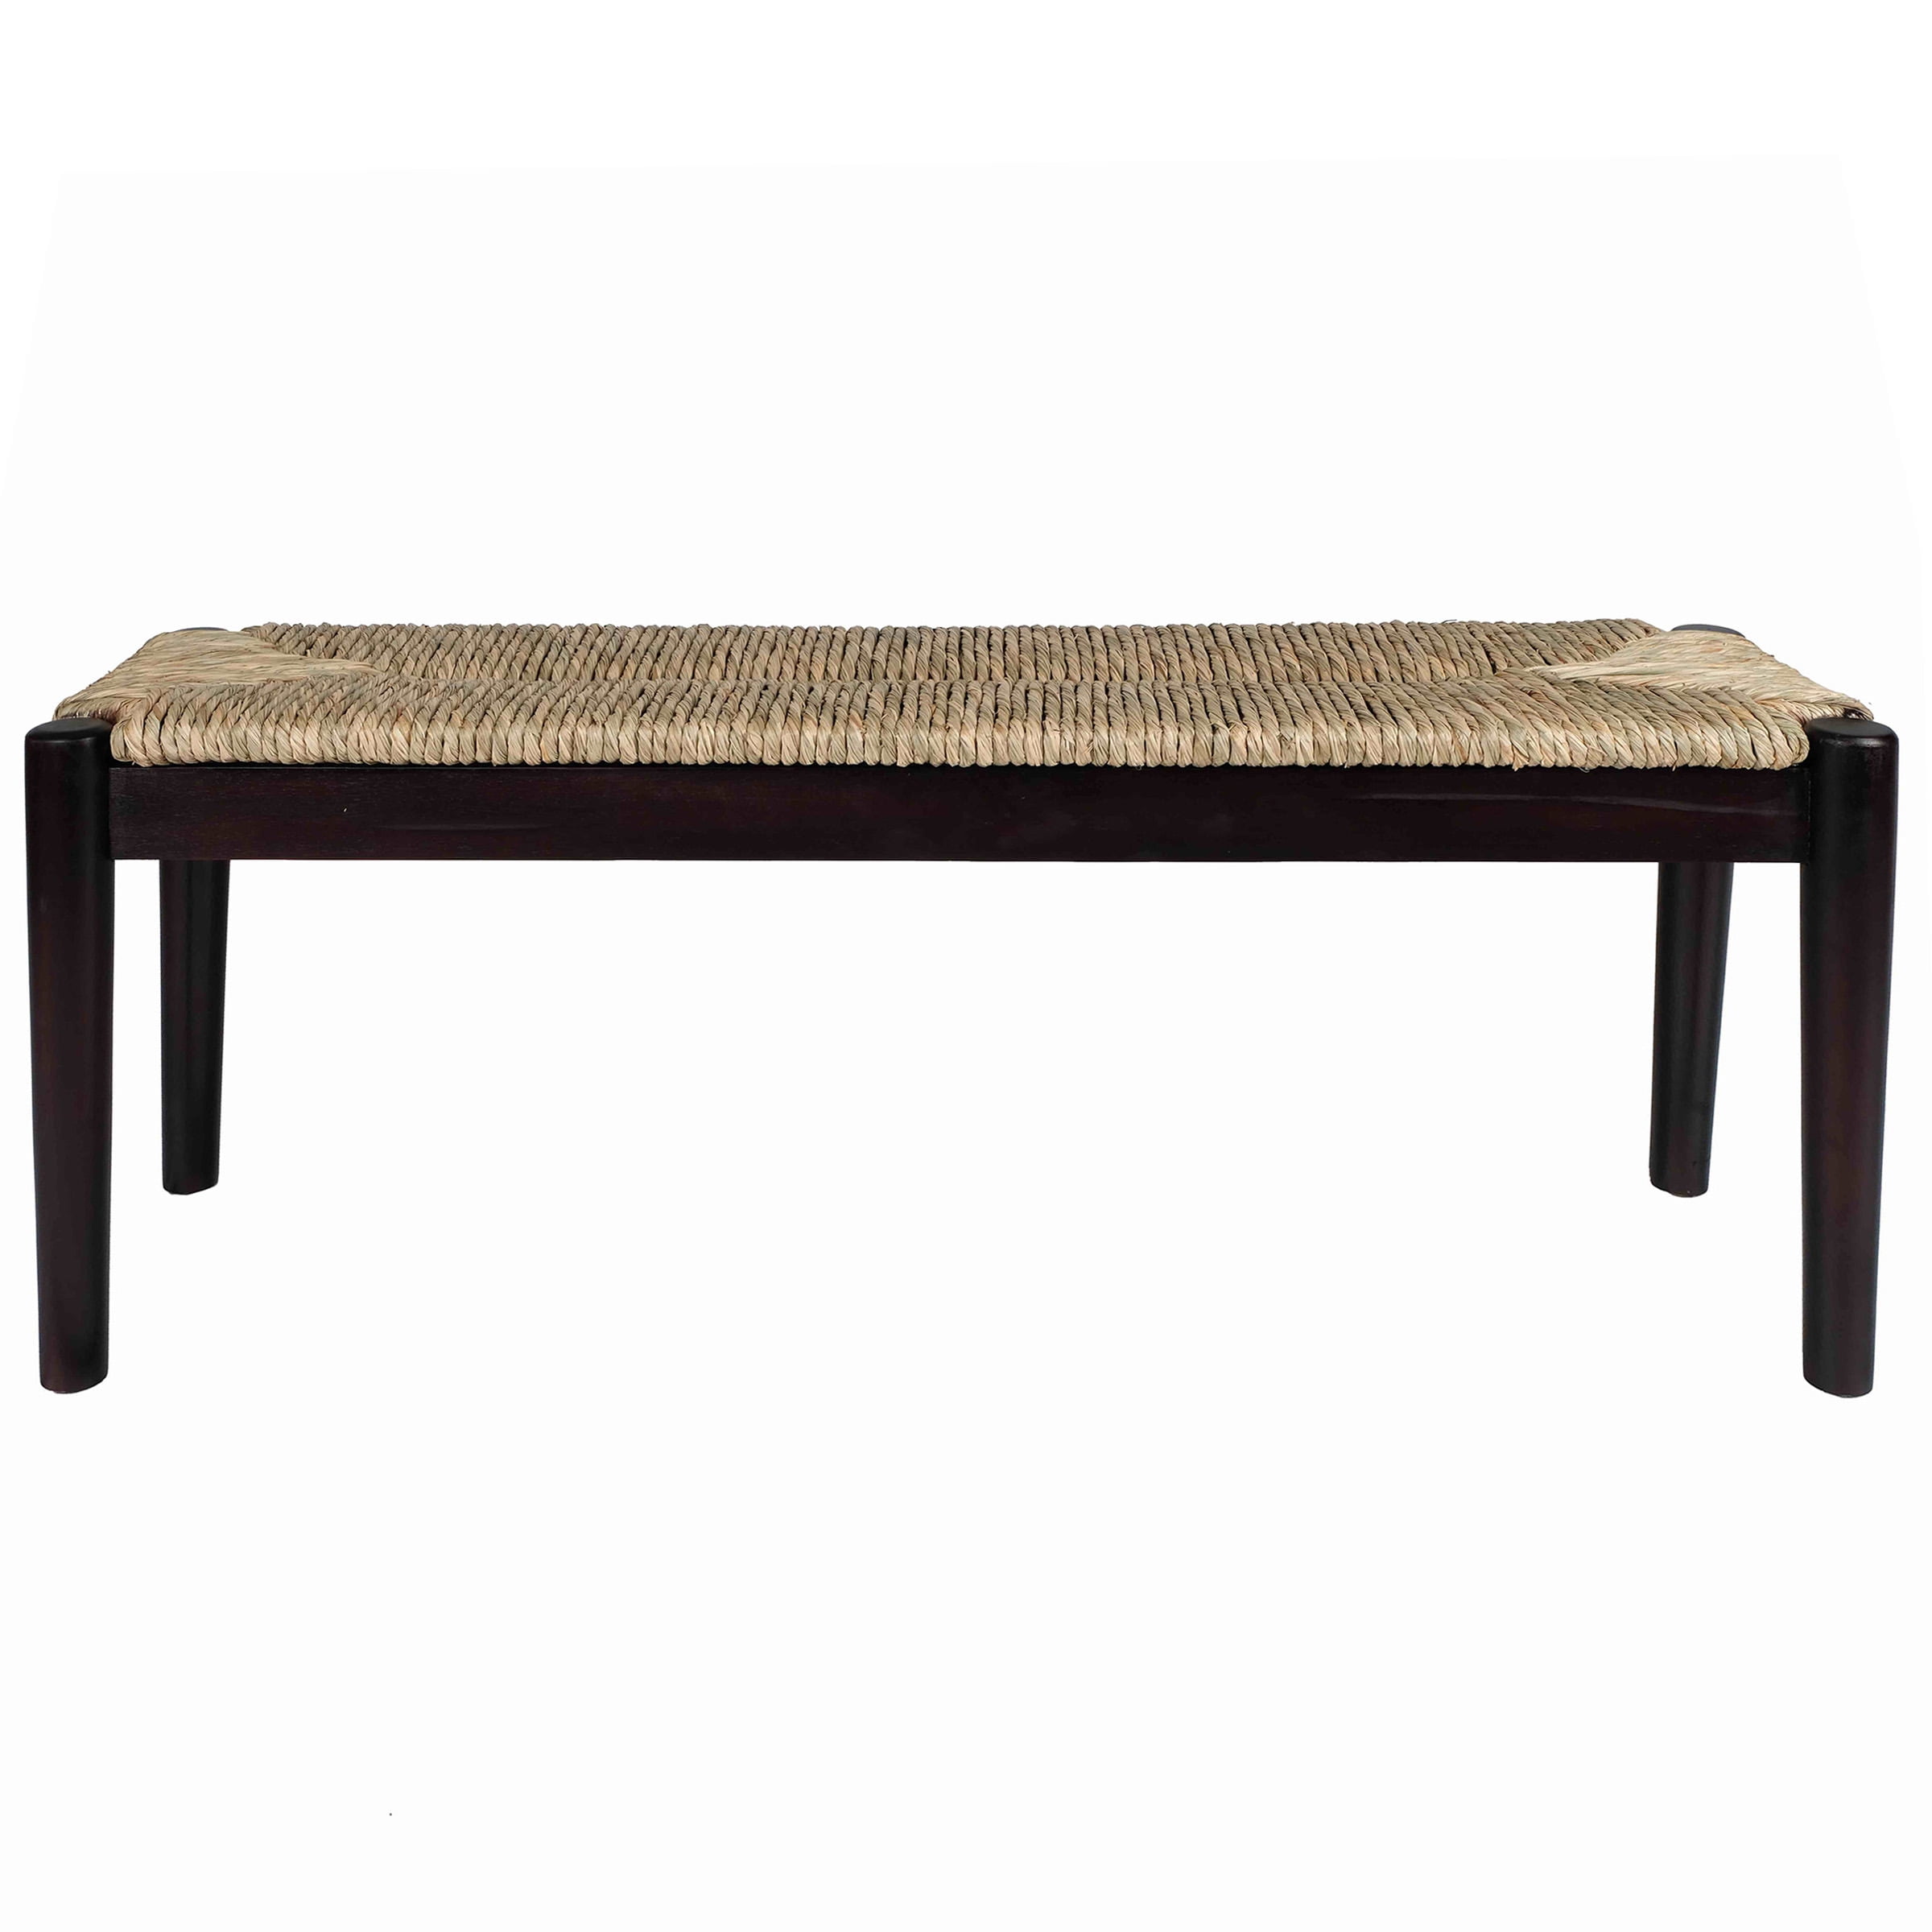 Large Seagrass Wood Bench - Natural Finish